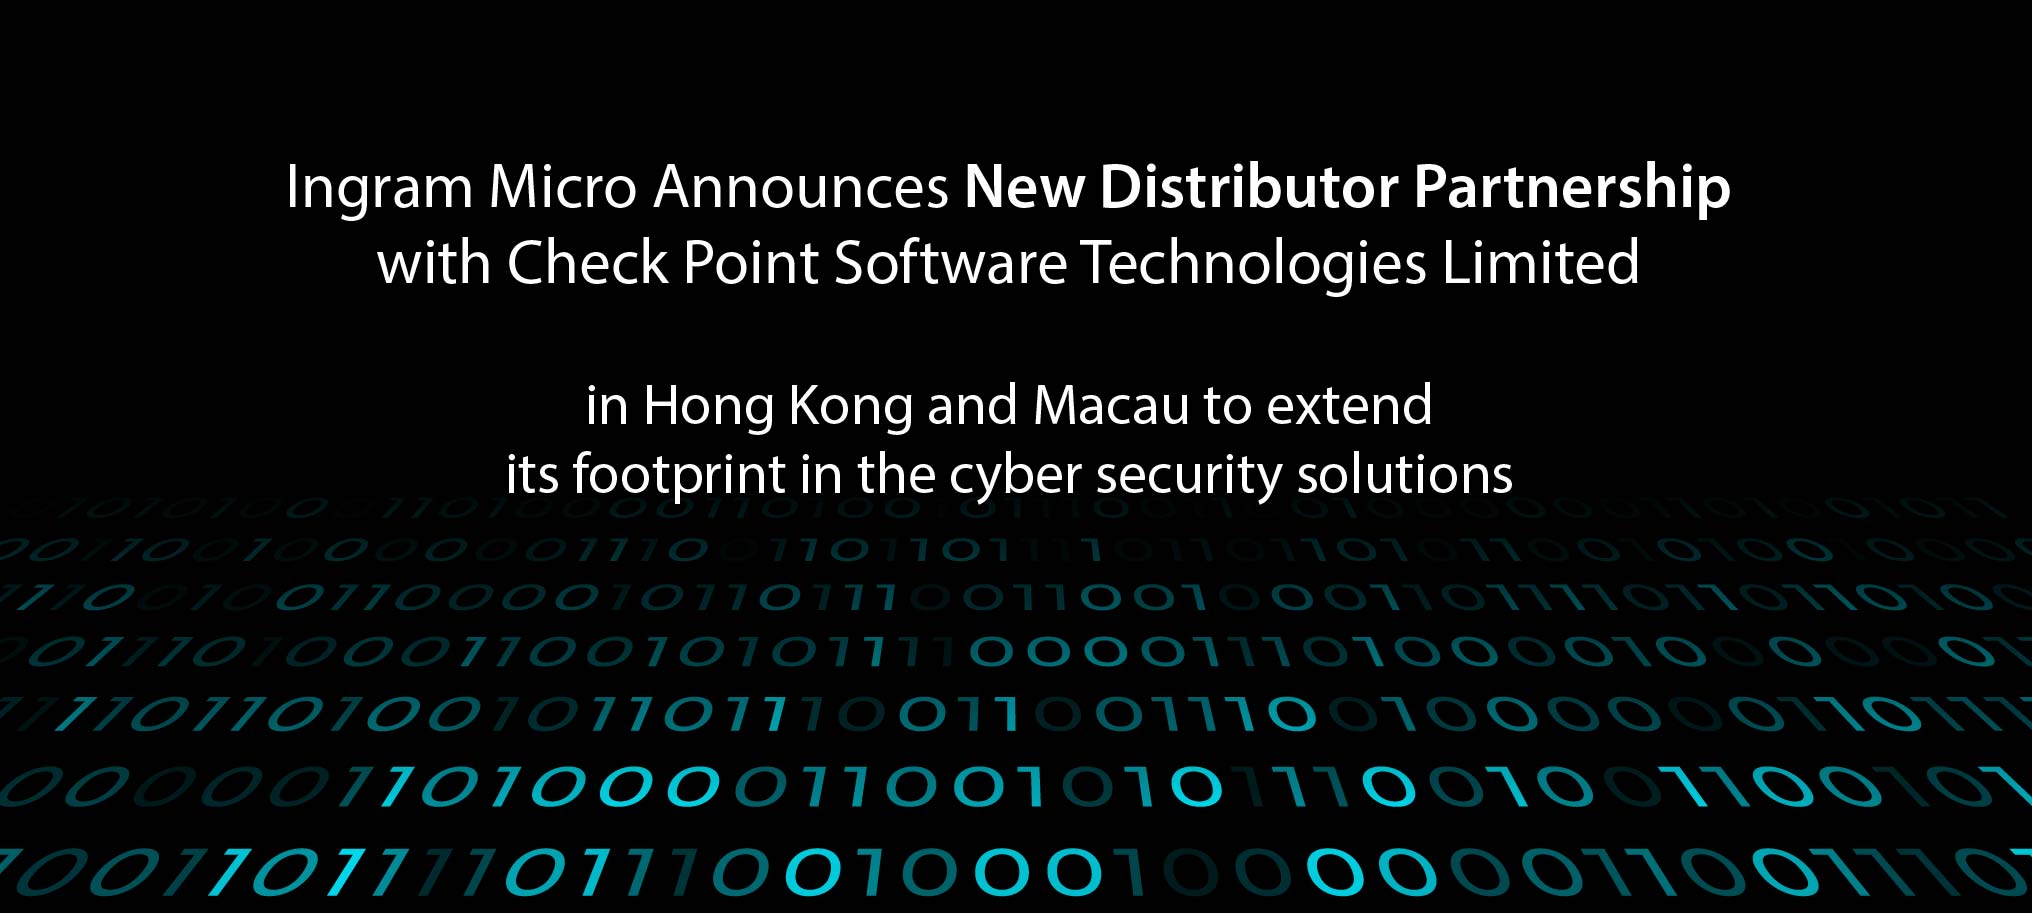 Ingram Micro Announces New Distributor Partnership with Check Point Software Technologies Limited in